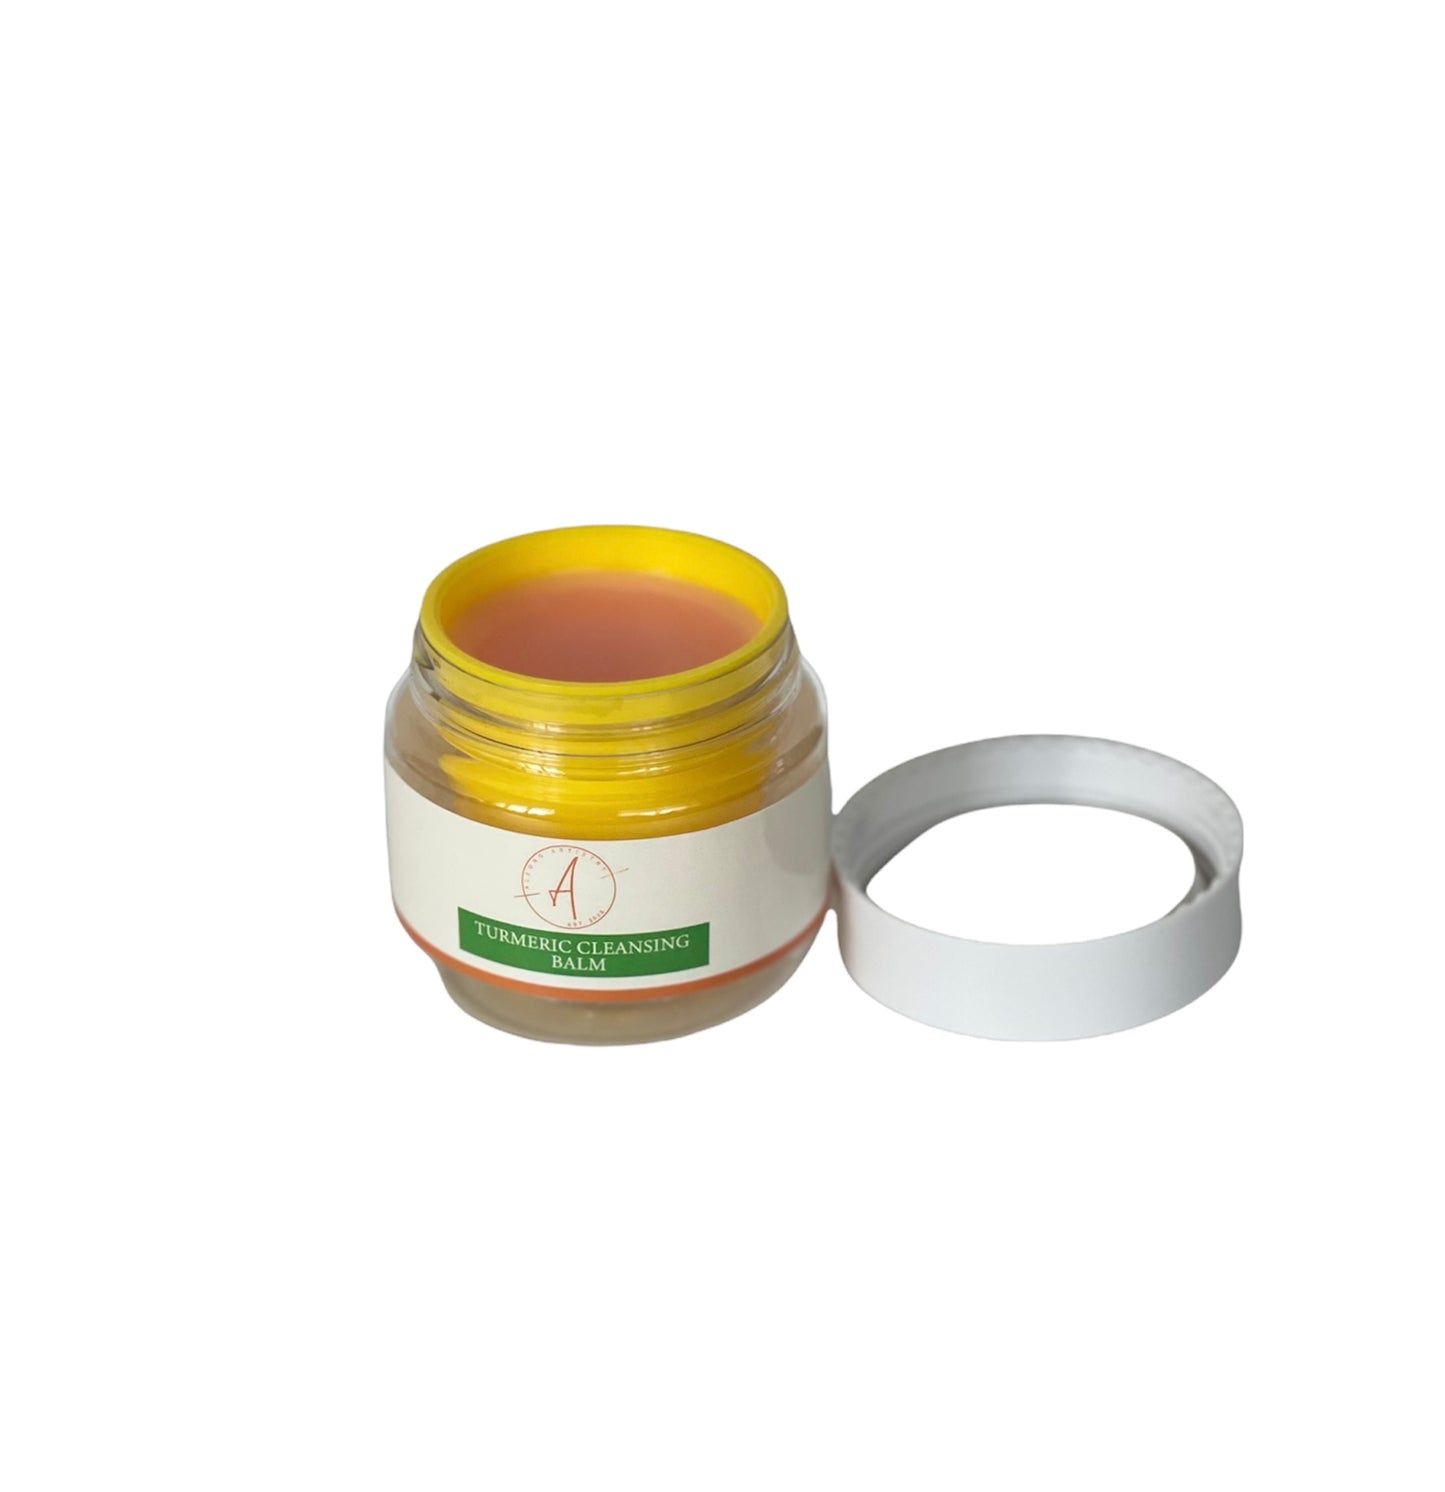 ALEONG ARTISTRY : TURMERIC CLEANSING BALM